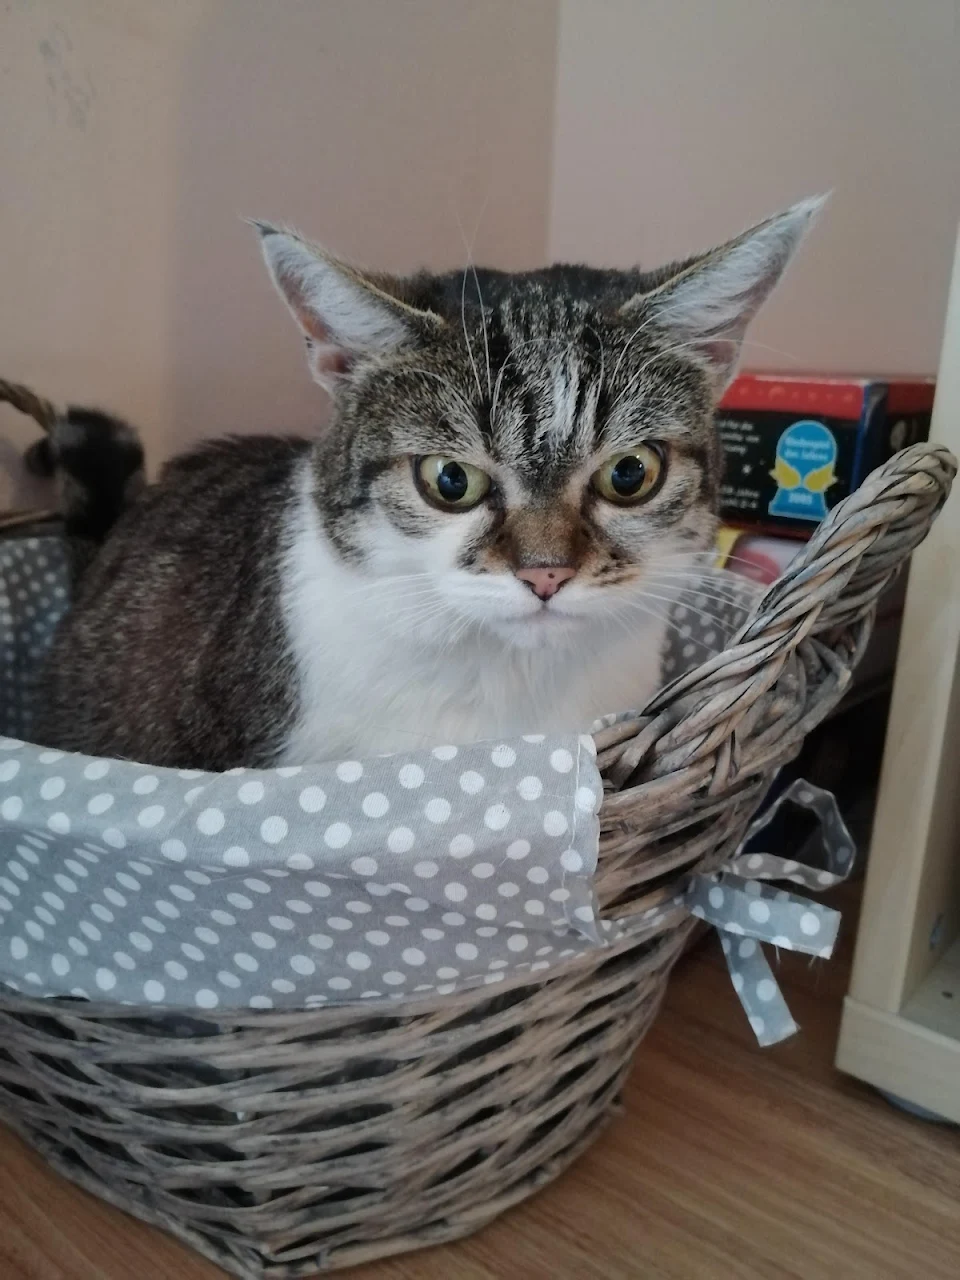 Upsetty Betty hates the comfy basket